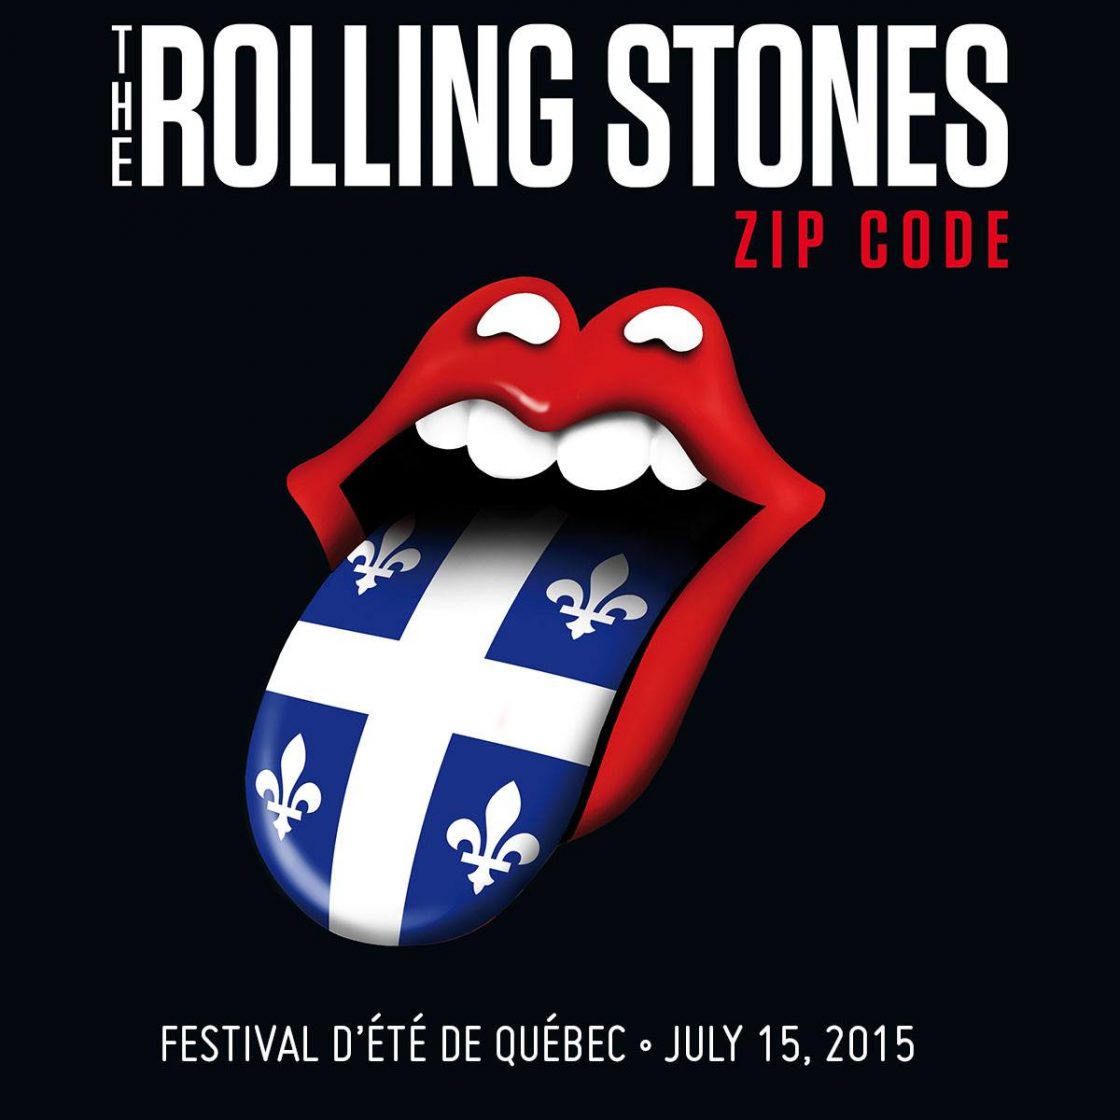 The Rolling Stones to play Quebec City July 15th, on sale April 9